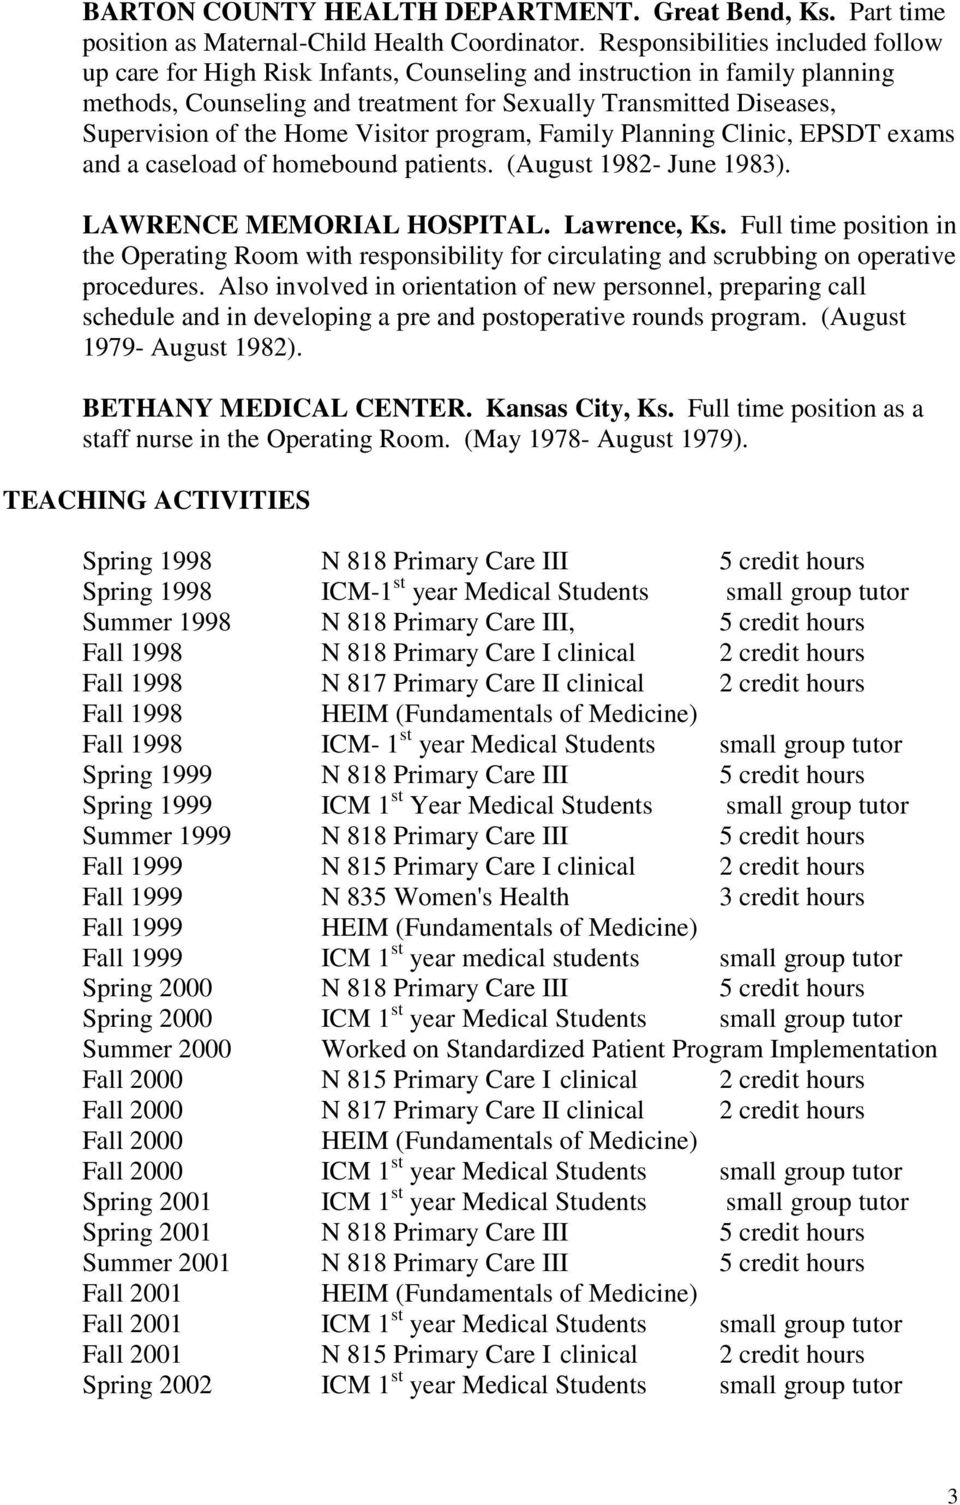 Home Visitor program, Family Planning Clinic, EPSDT exams and a caseload of homebound patients. (August 1982- June 1983). LAWRENCE MEMORIAL HOSPITAL. Lawrence, Ks.